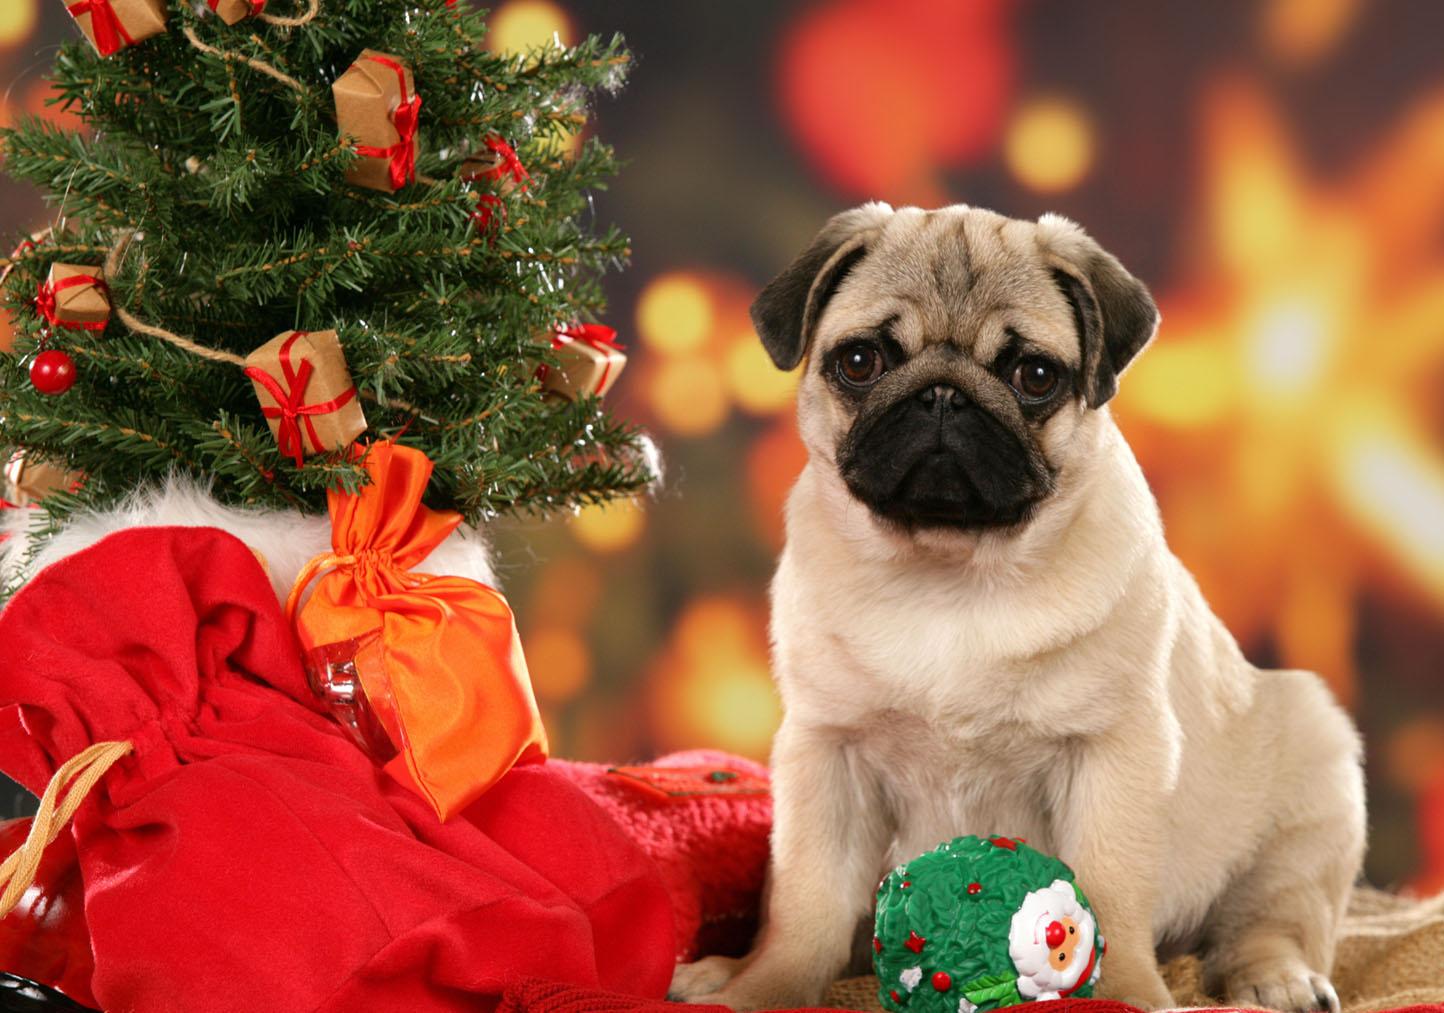 Free download Christmas Pug Wallpaper The Dog Wallpaper Best